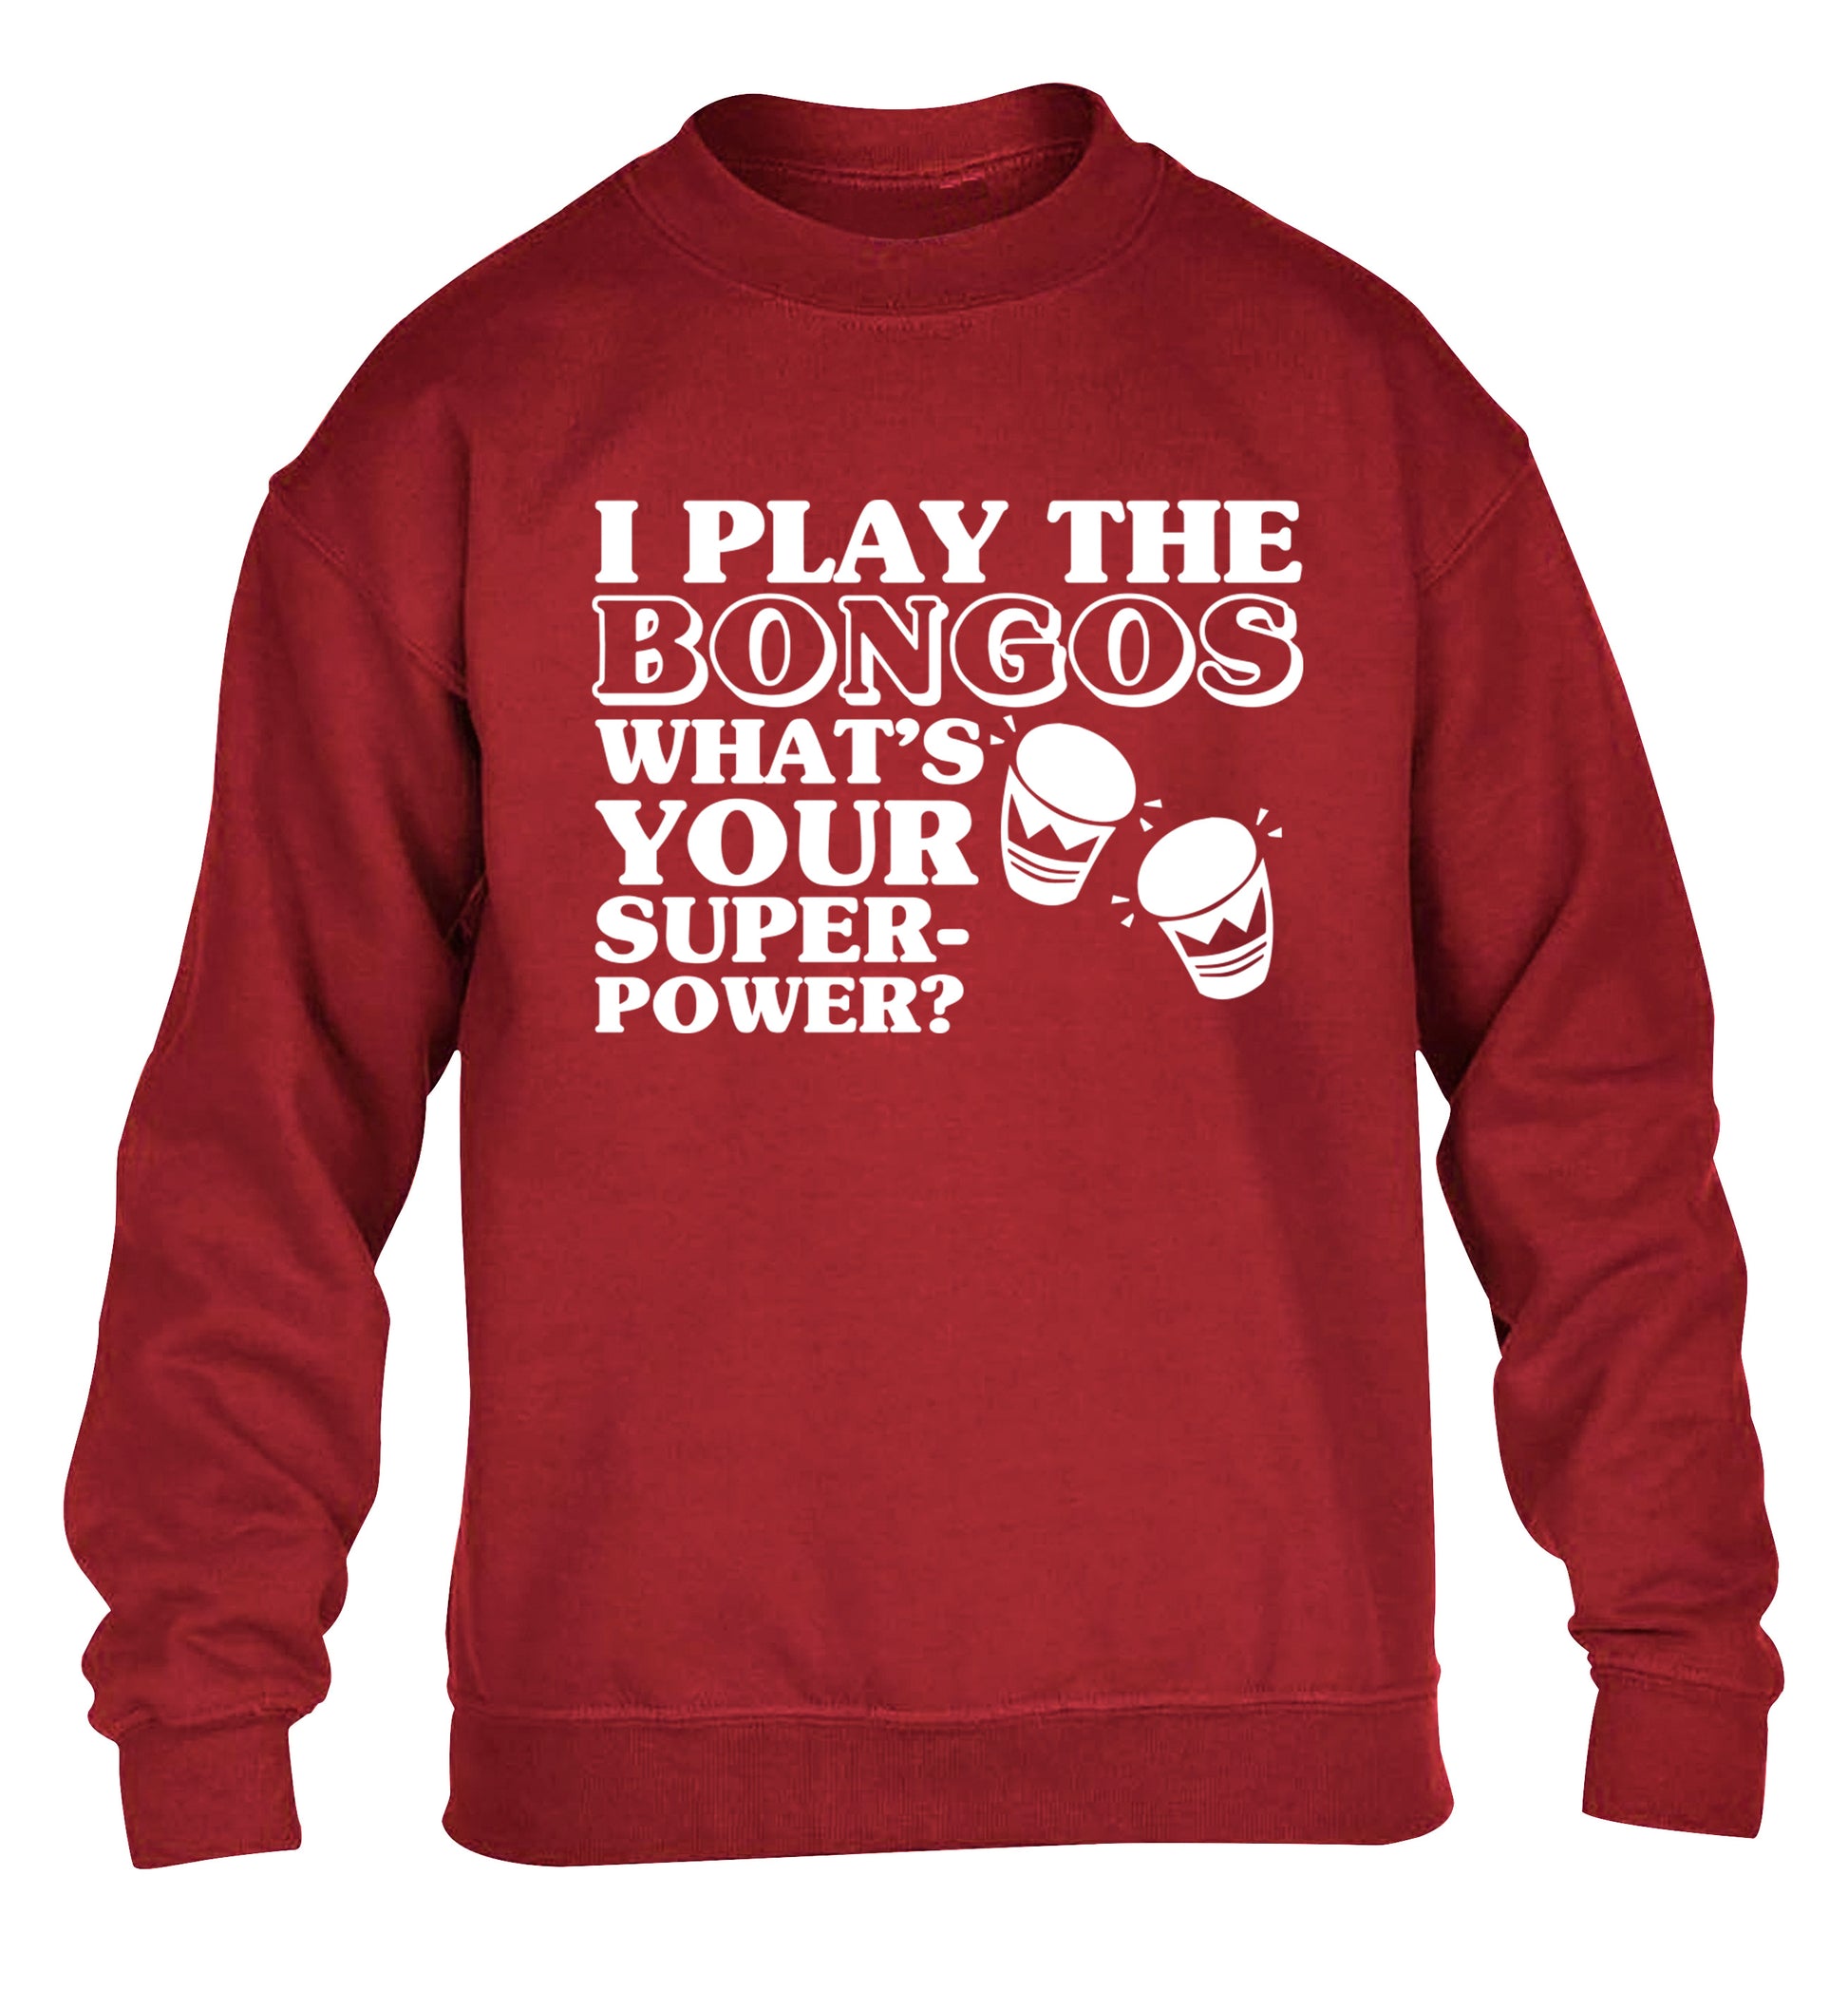 I play the bongos what's your superpower? children's grey sweater 12-14 Years